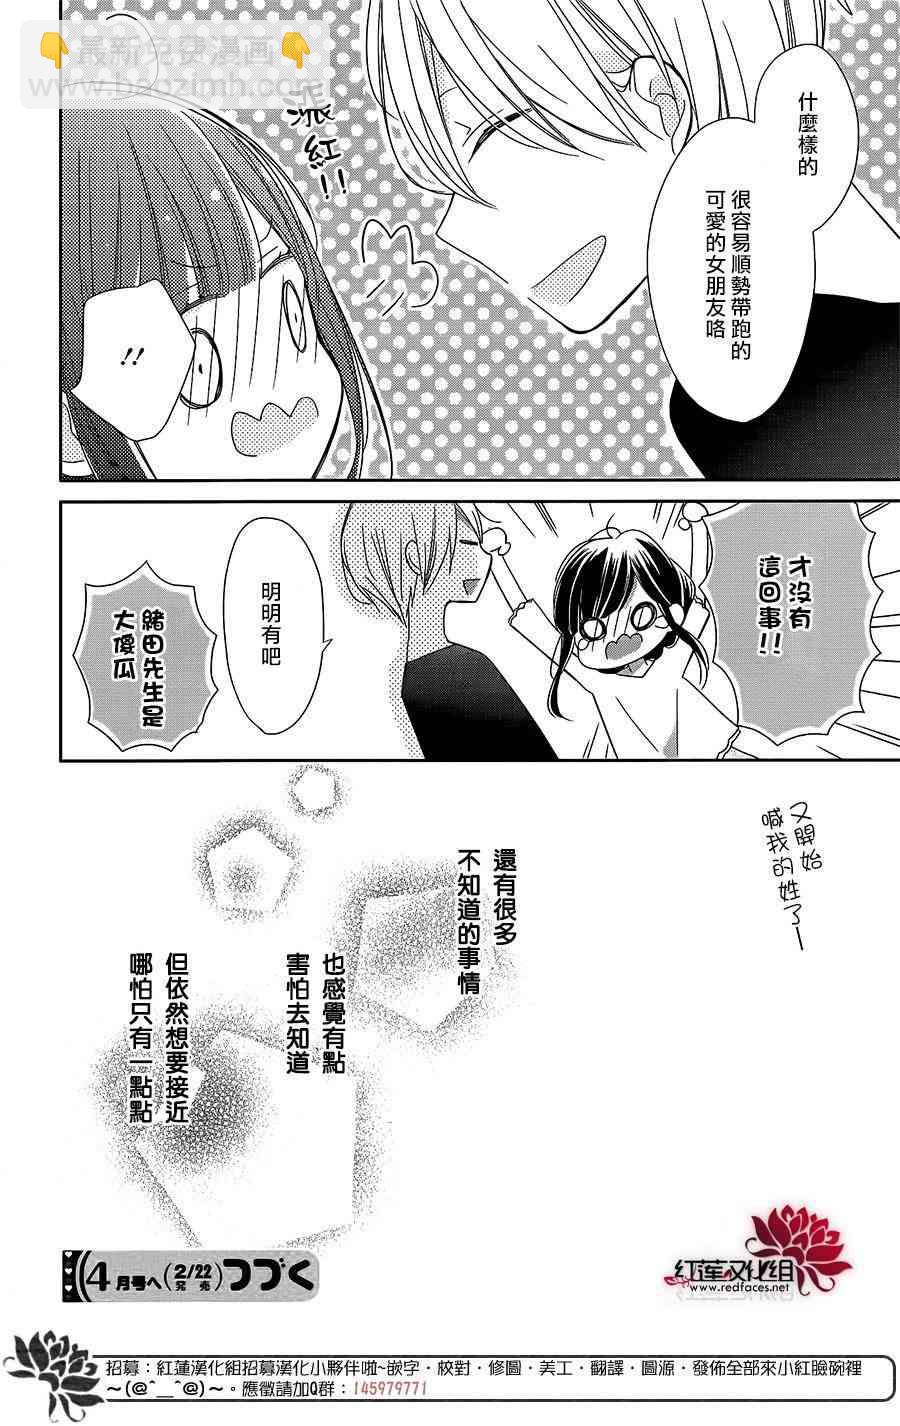 If given a second chance - 7話 - 6